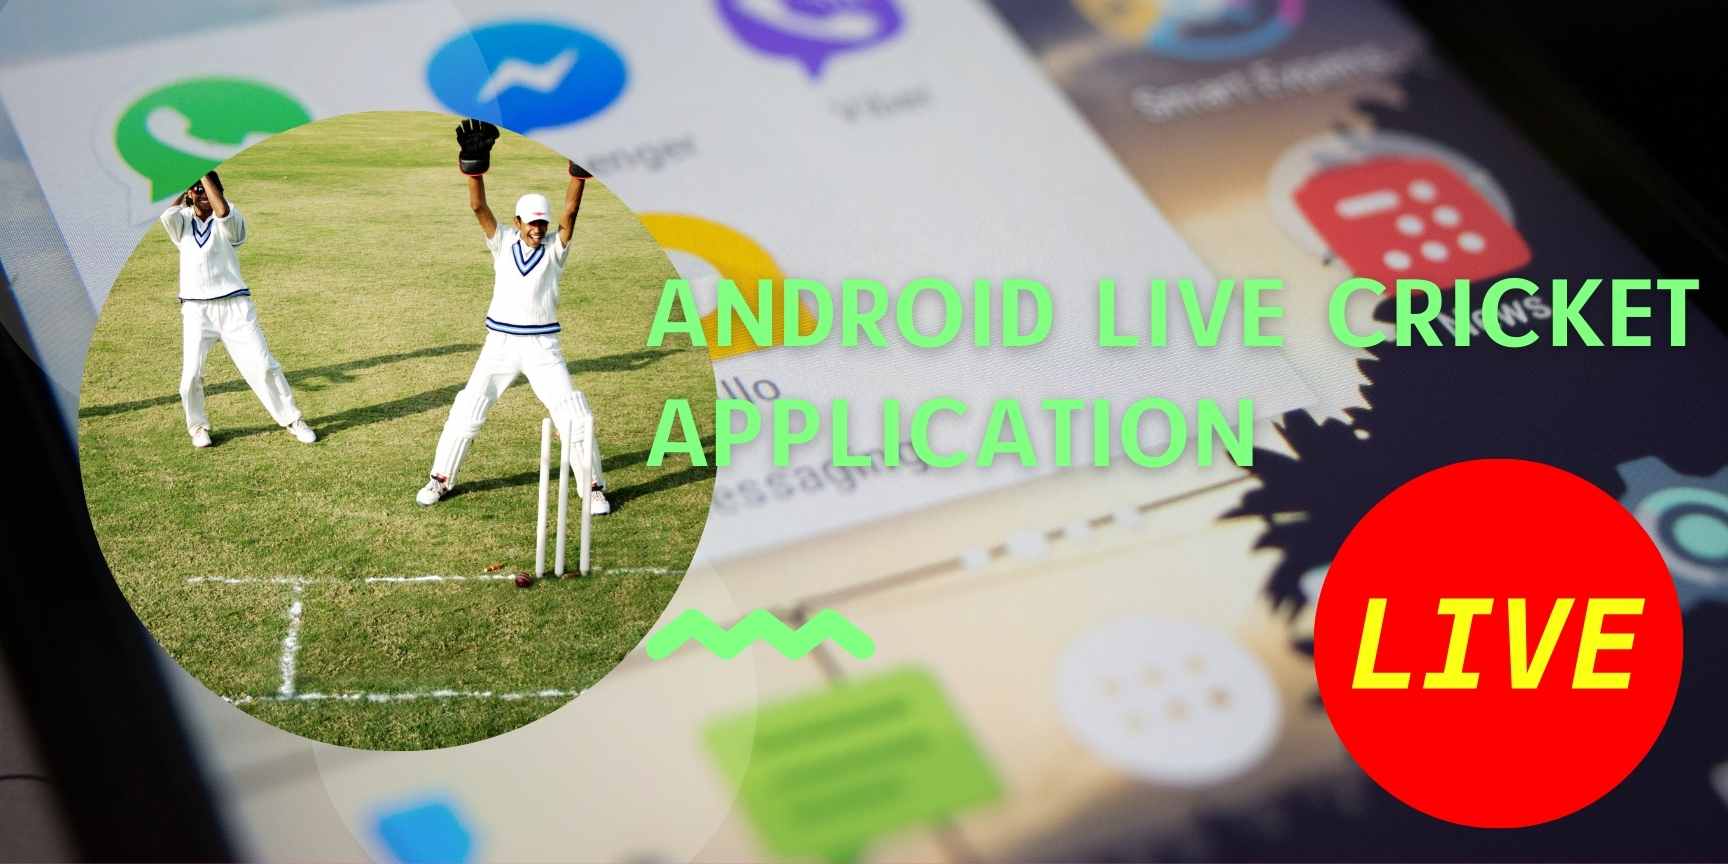 Android live cricket application